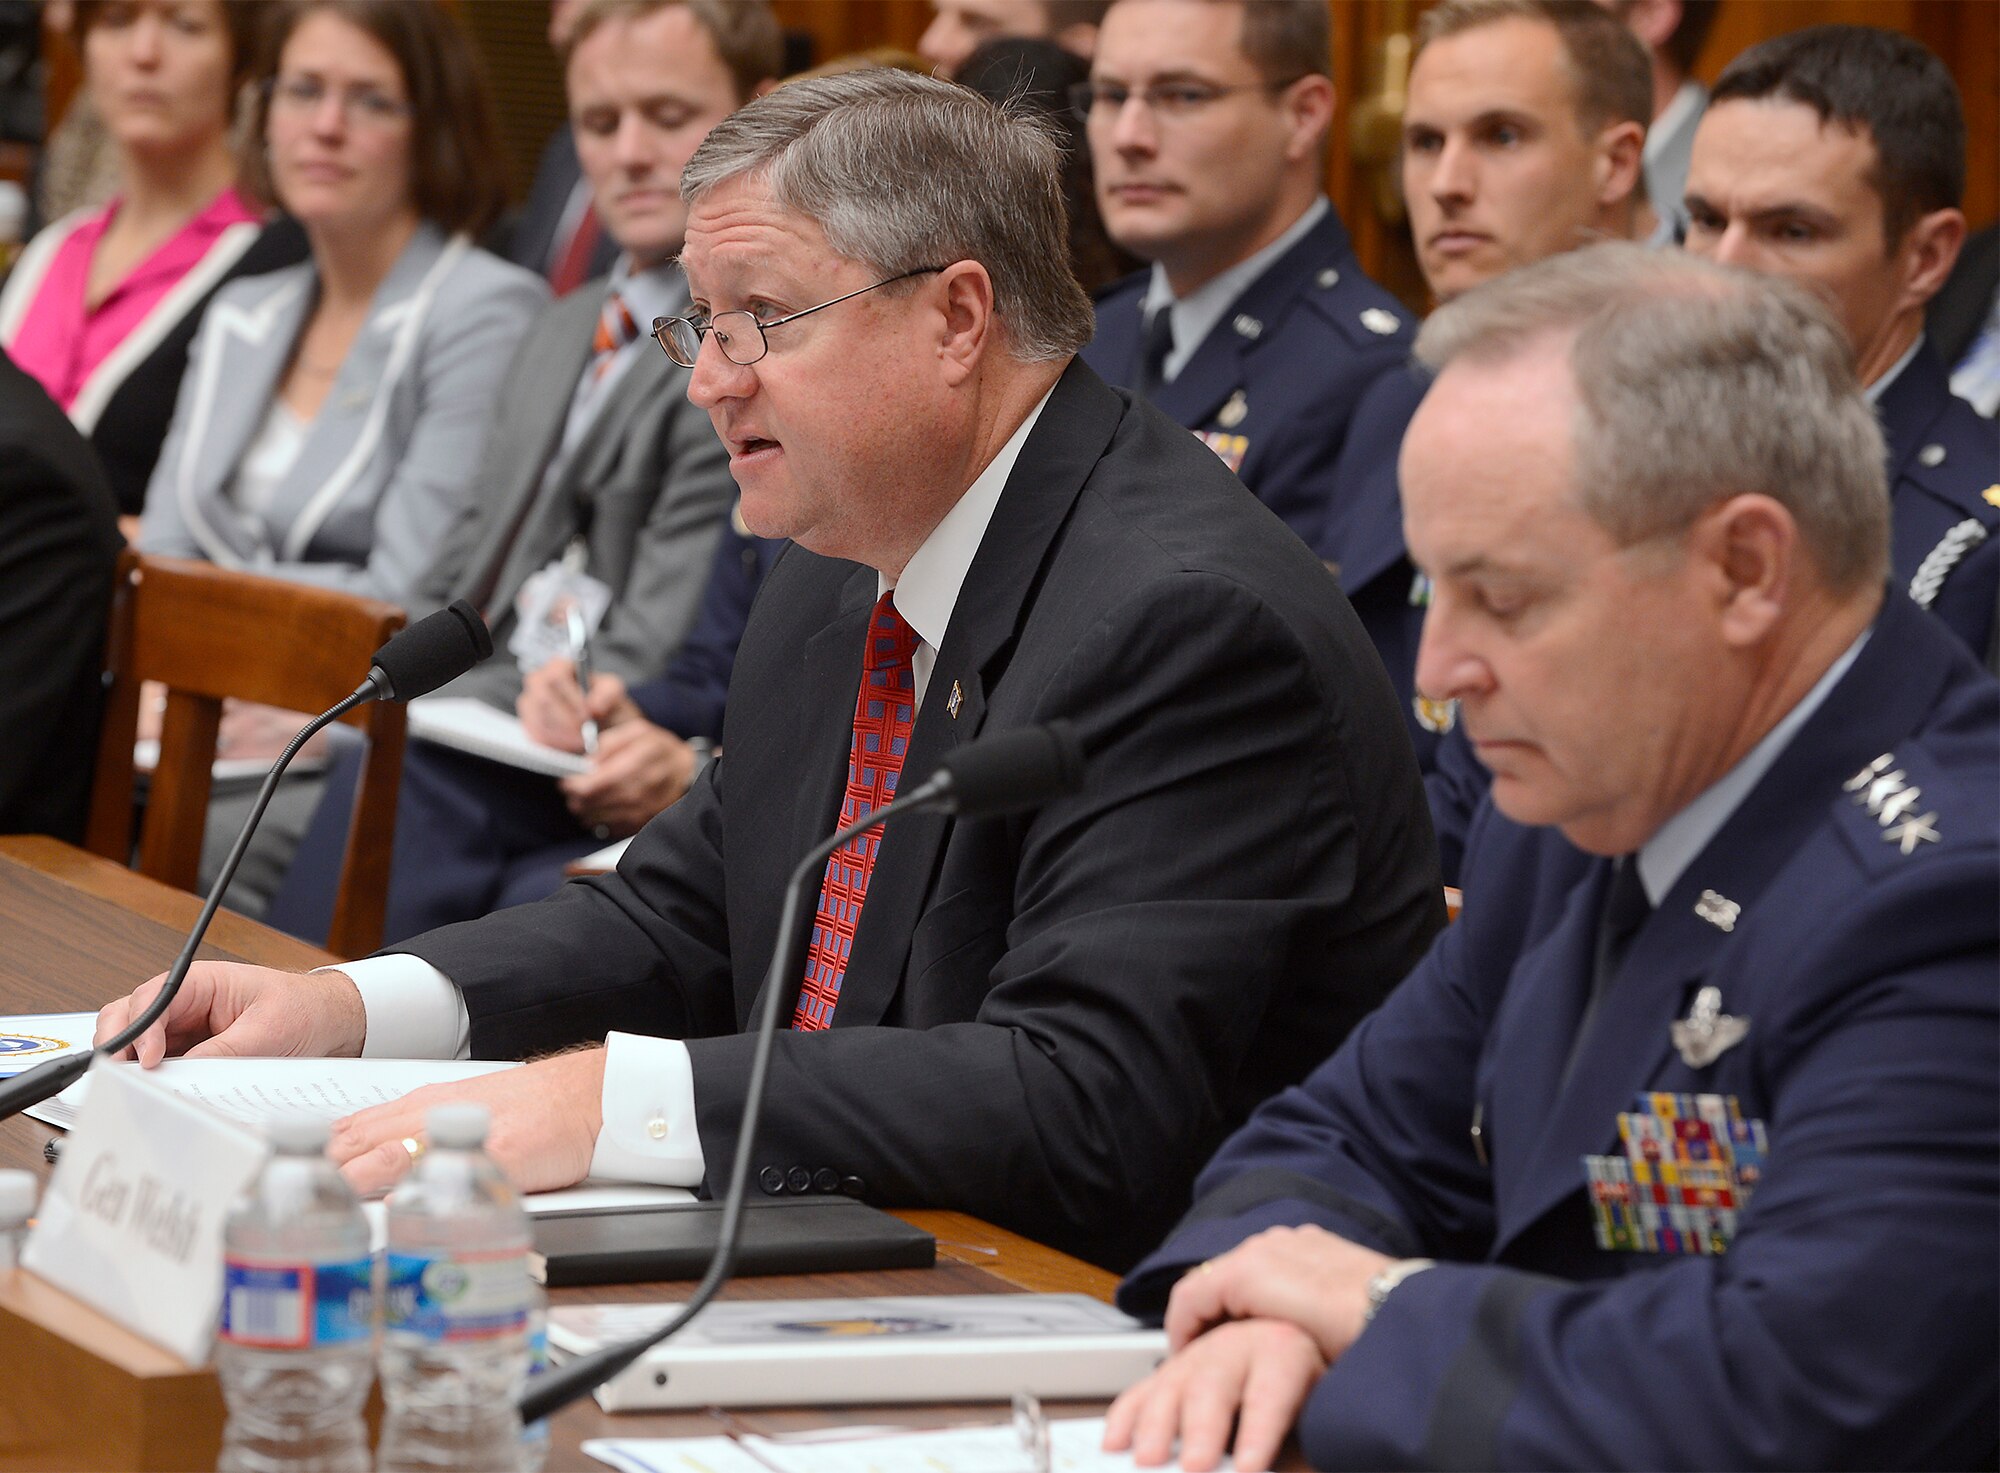 Secretary of the Air Force Michael Donley gives his opening statement during a hearing with the House Armed Services Committee, April 12, 2013, in Washington, D.C.  Both Donley and Air Force Chief of Staff Gen. Mark A. Welsh III were on Capitol Hill to discuss the Air Force's fiscal 2014 budget.  (U.S. Air Force photo/Scott M. Ash)